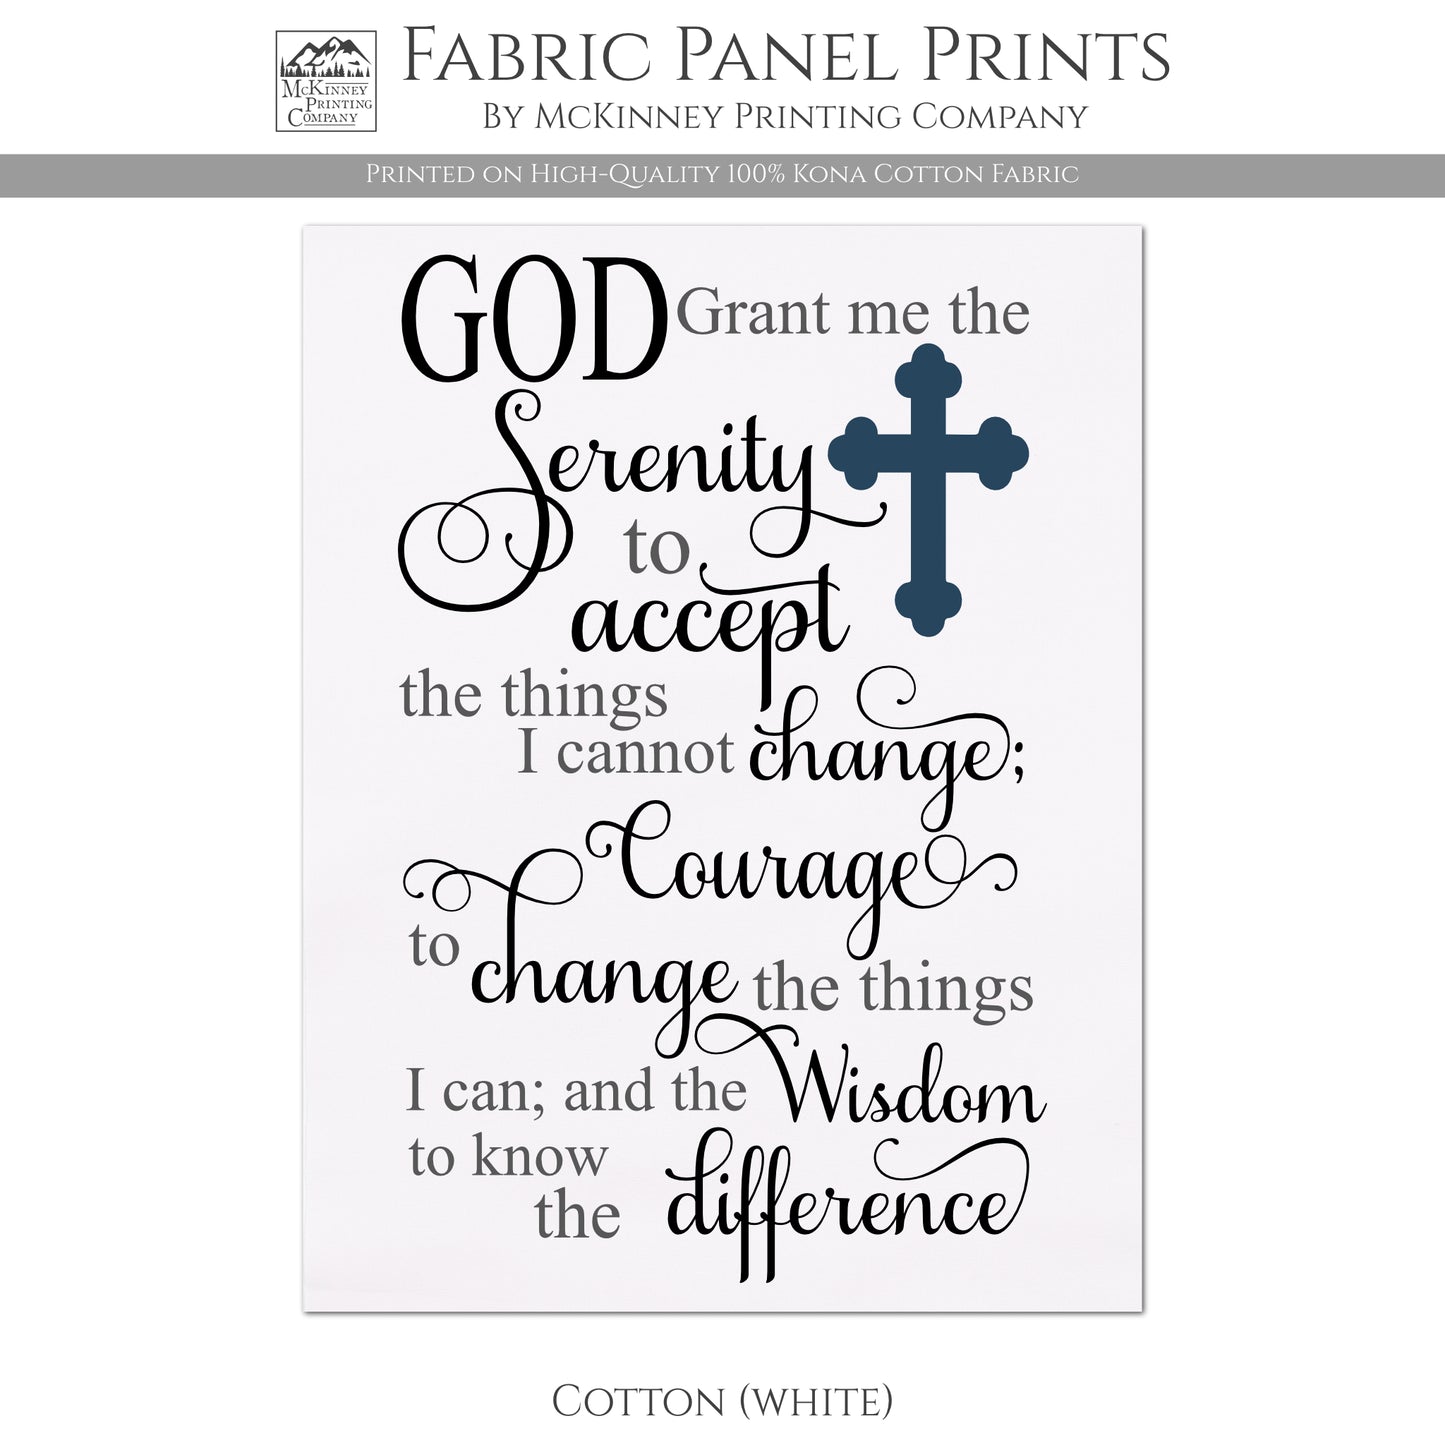 God grant me the serenity to accept the things I cannot change; courage to change the things I can; and the wisdom to know the difference - Serenity Prayer, Fabric Panel Print - Cotton, White